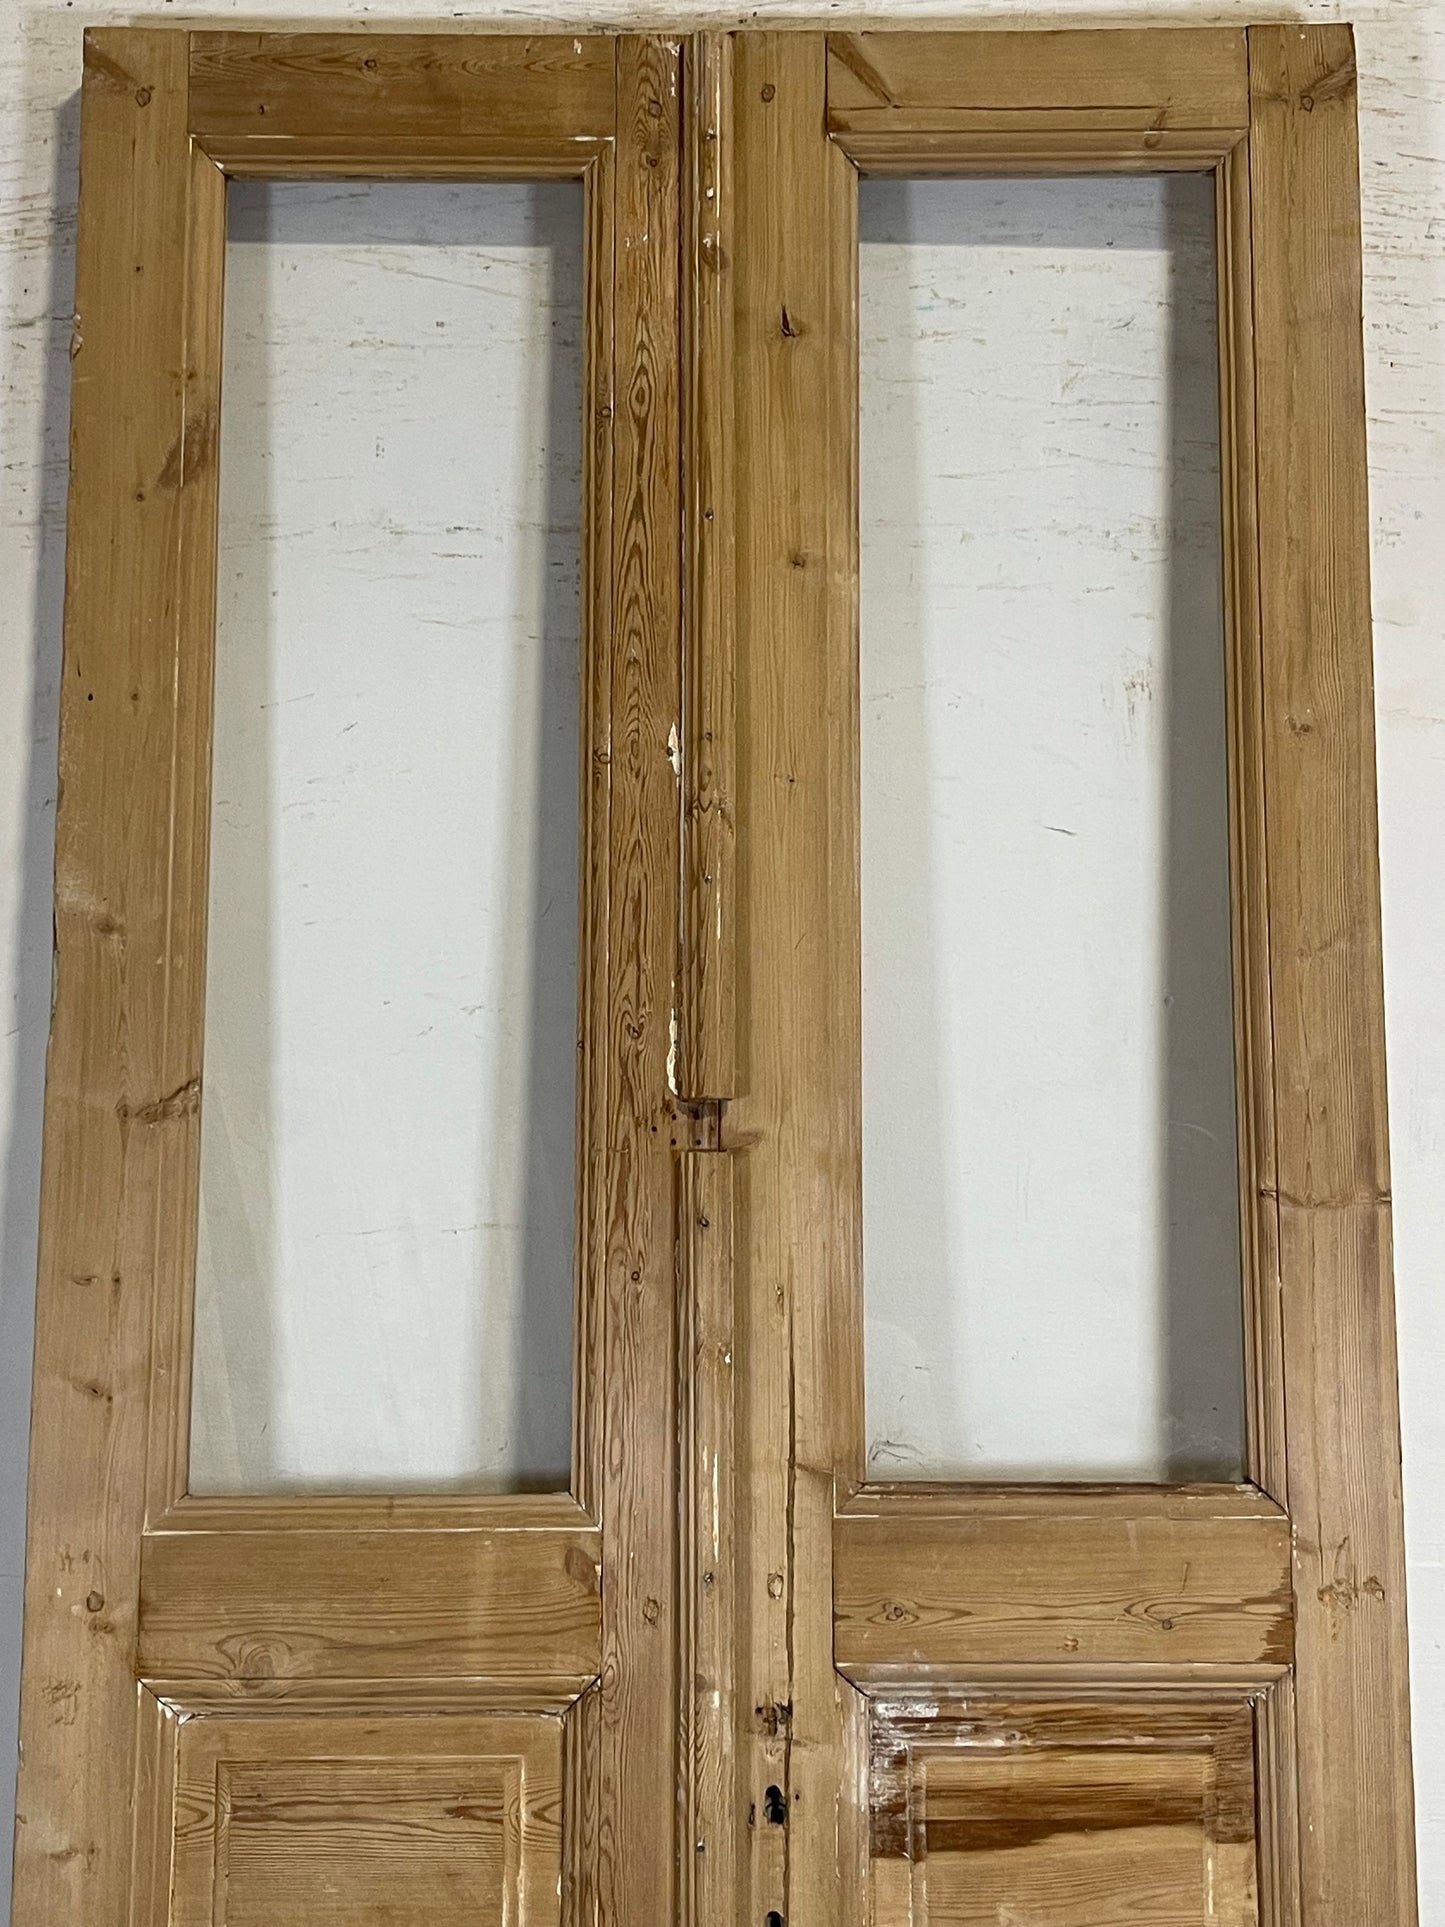 Antique French panel doors with glass (94.25x38.5) K341